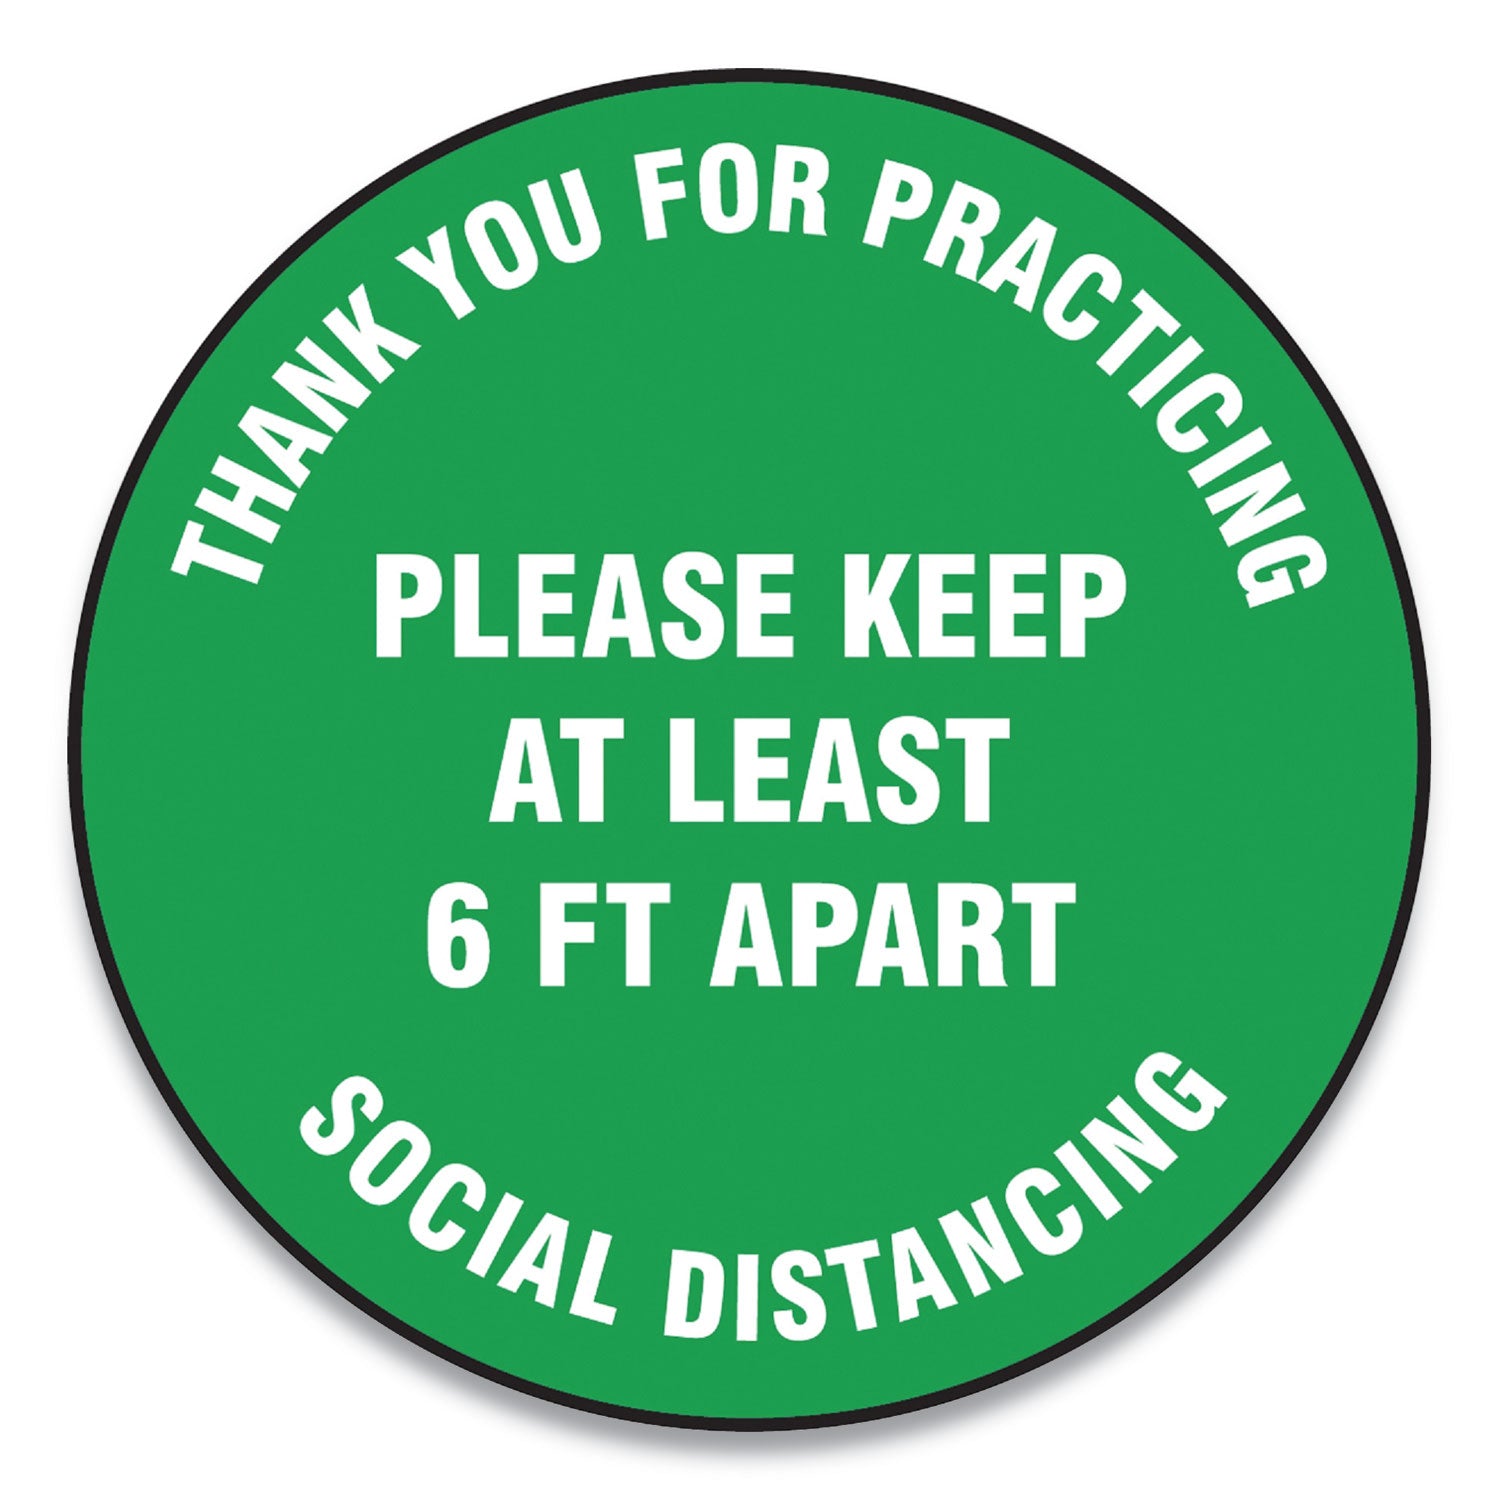 slip-gard-floor-signs-12-circle-thank-you-for-practicing-social-distancing-please-keep-at-least-6-ft-apart-green-25-pk_gn1mfs424esp - 1